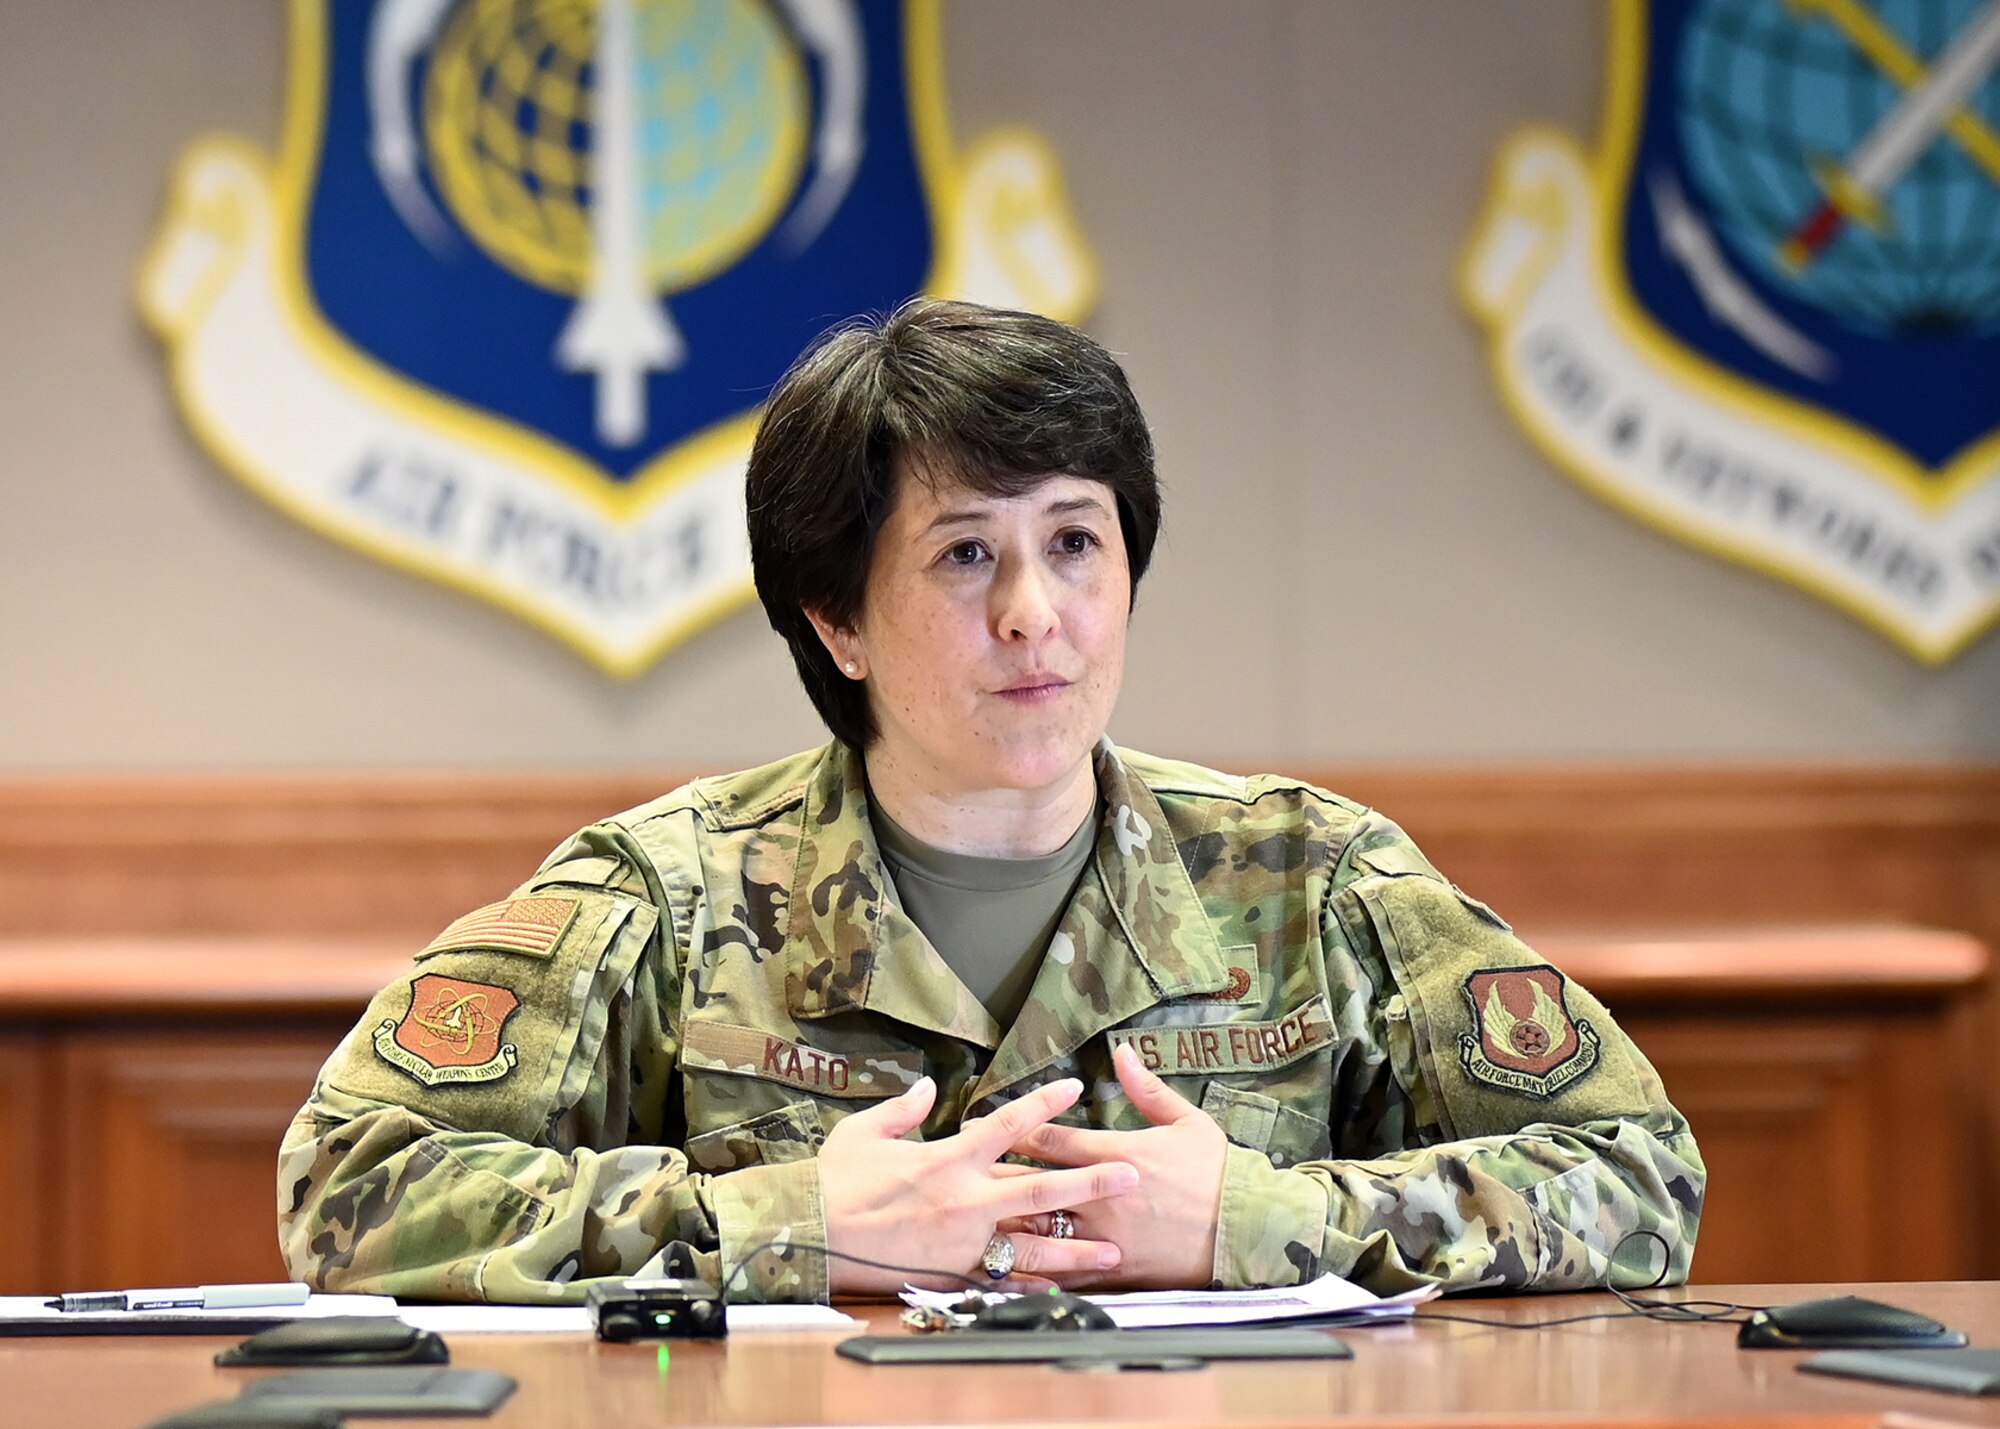 Col. Amanda Kato, AF PEO, Nuclear Command, Control and Communications, headquartered here, addresses defense and industry leaders during the AFCEA Lexington-Concord Chapter’s New Horizons 2021 March 23. The theme of virtual five-day event was “Accelerating Change -- Strengthening Partnerships --Securing the Future.”